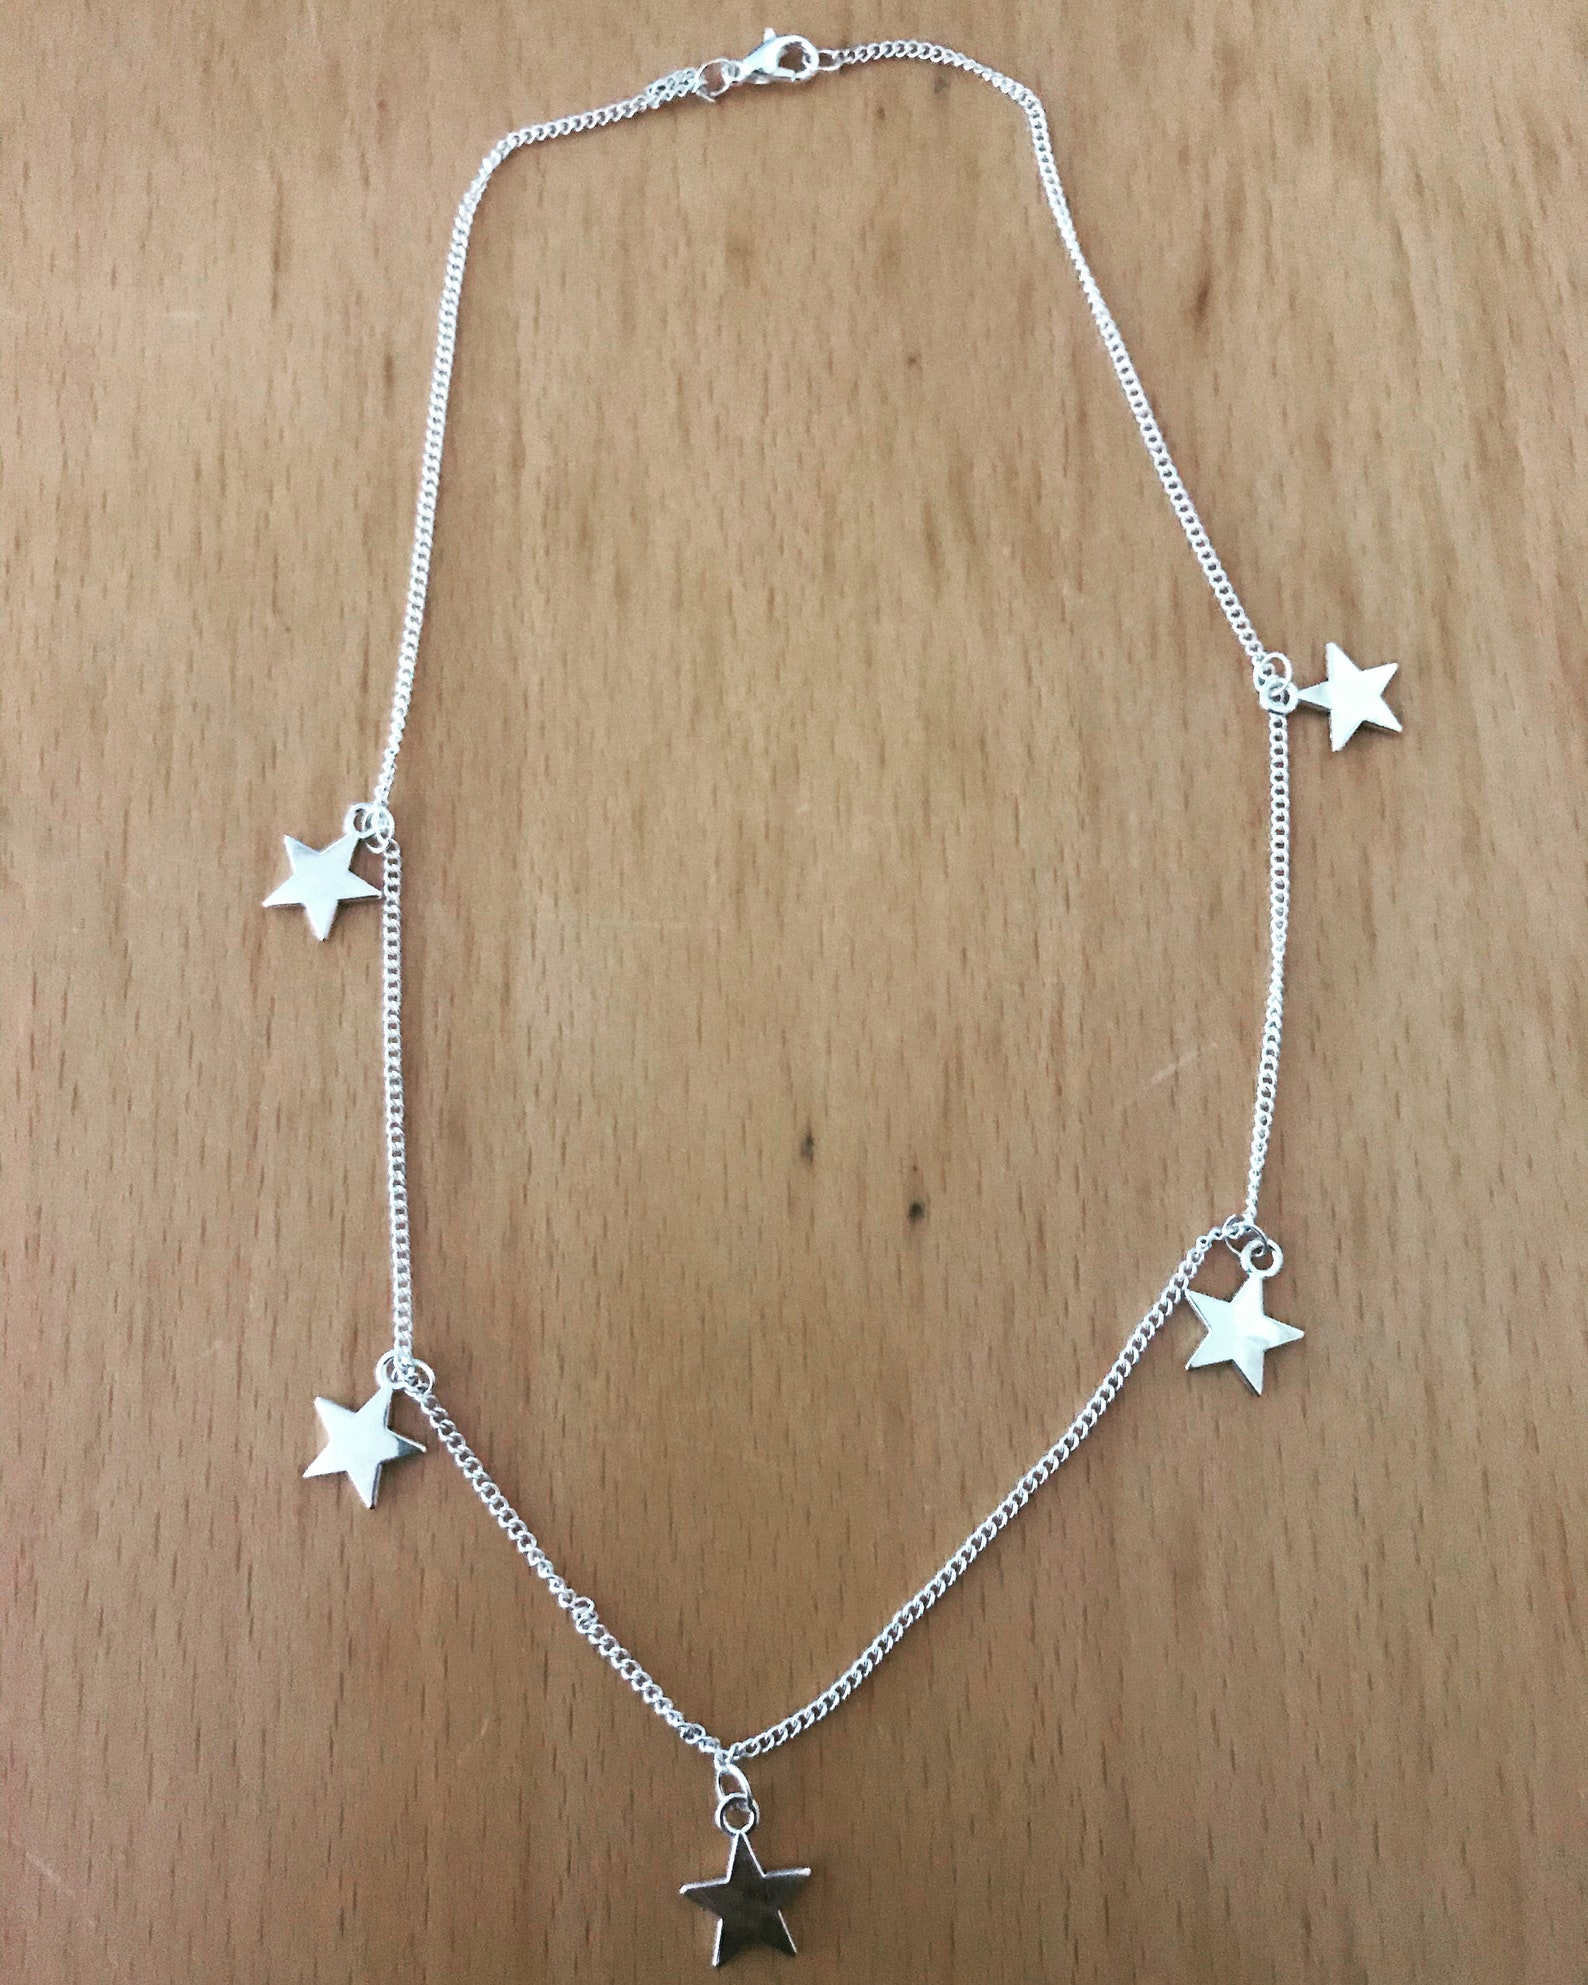 Silver necklace with stars | Etsy